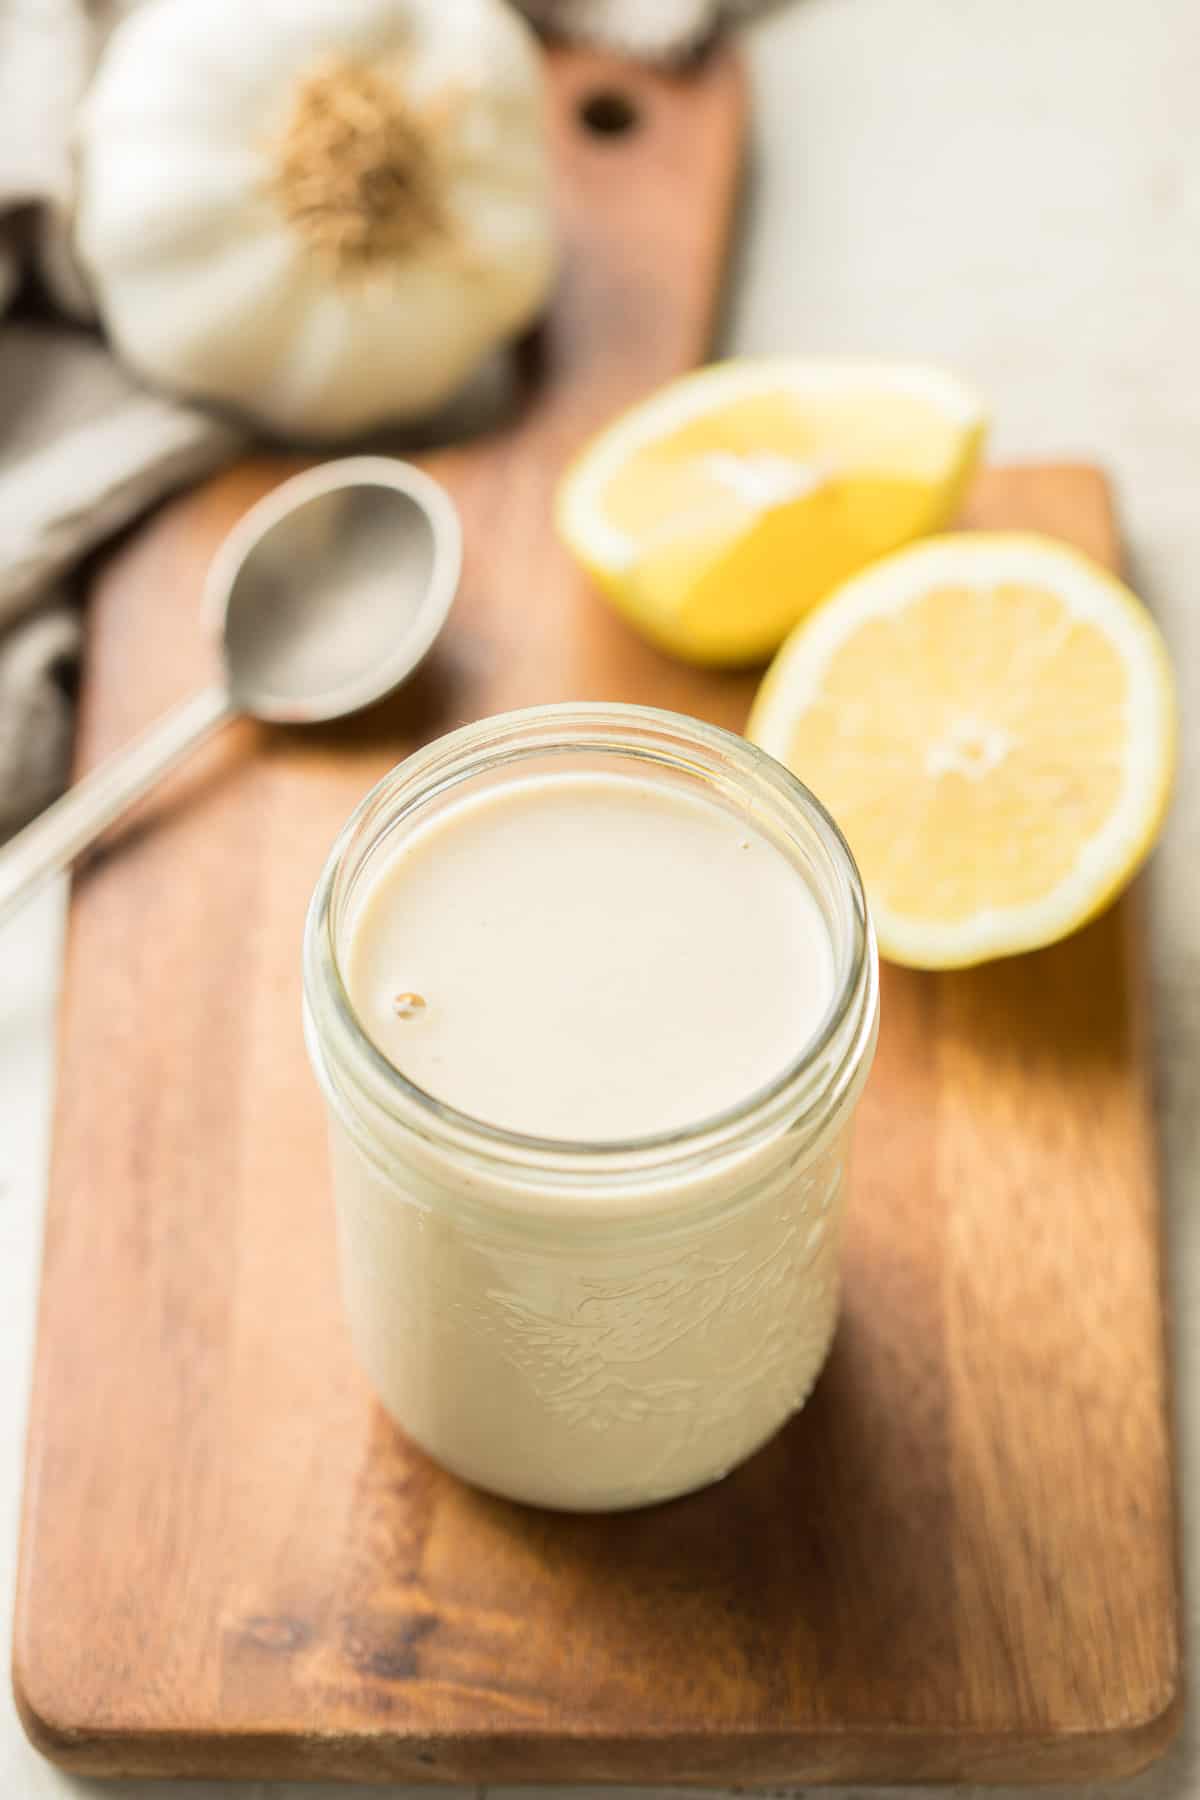 Jar of tahini dressing with lemons and garlic in the background.